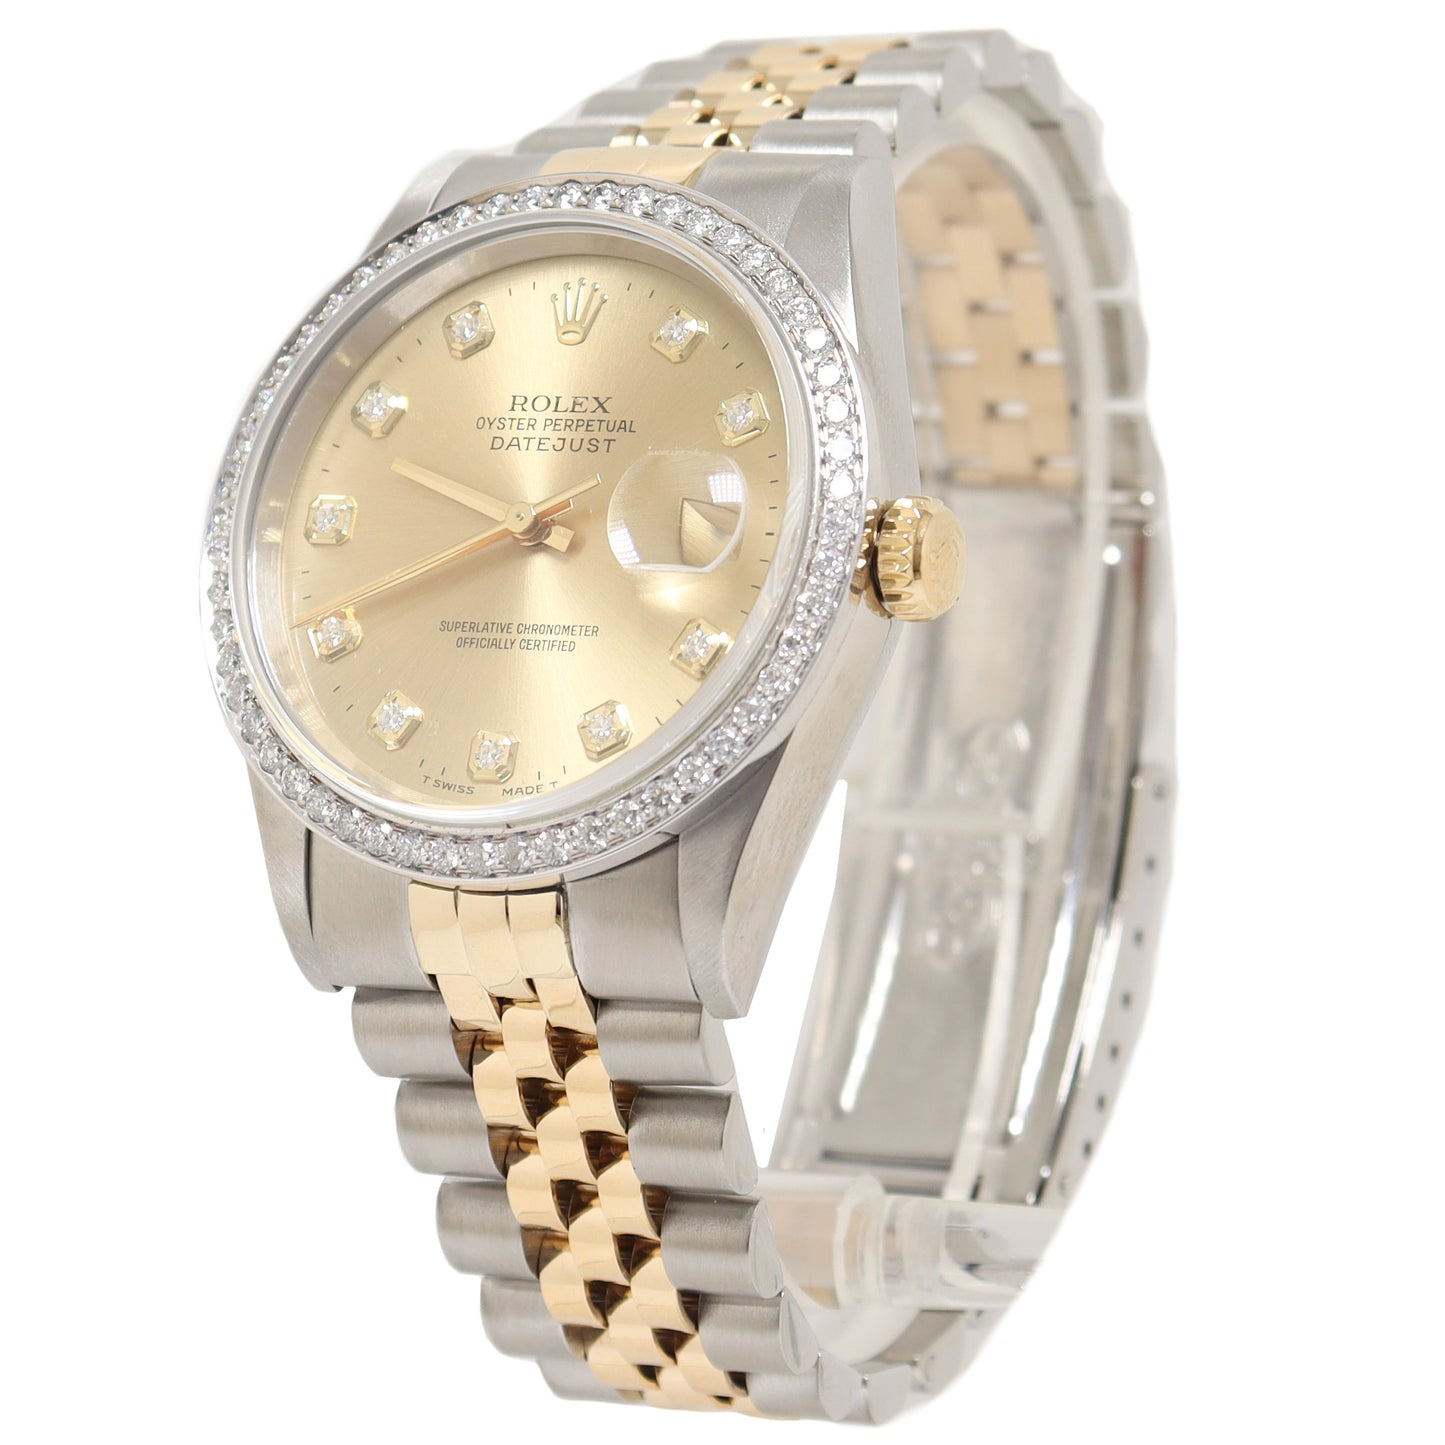 Rolex Datejust Yellow Gold & Stainless Steel Factory Champagne Diamond Dial Watch Reference# 16233 - Happy Jewelers Fine Jewelry Lifetime Warranty